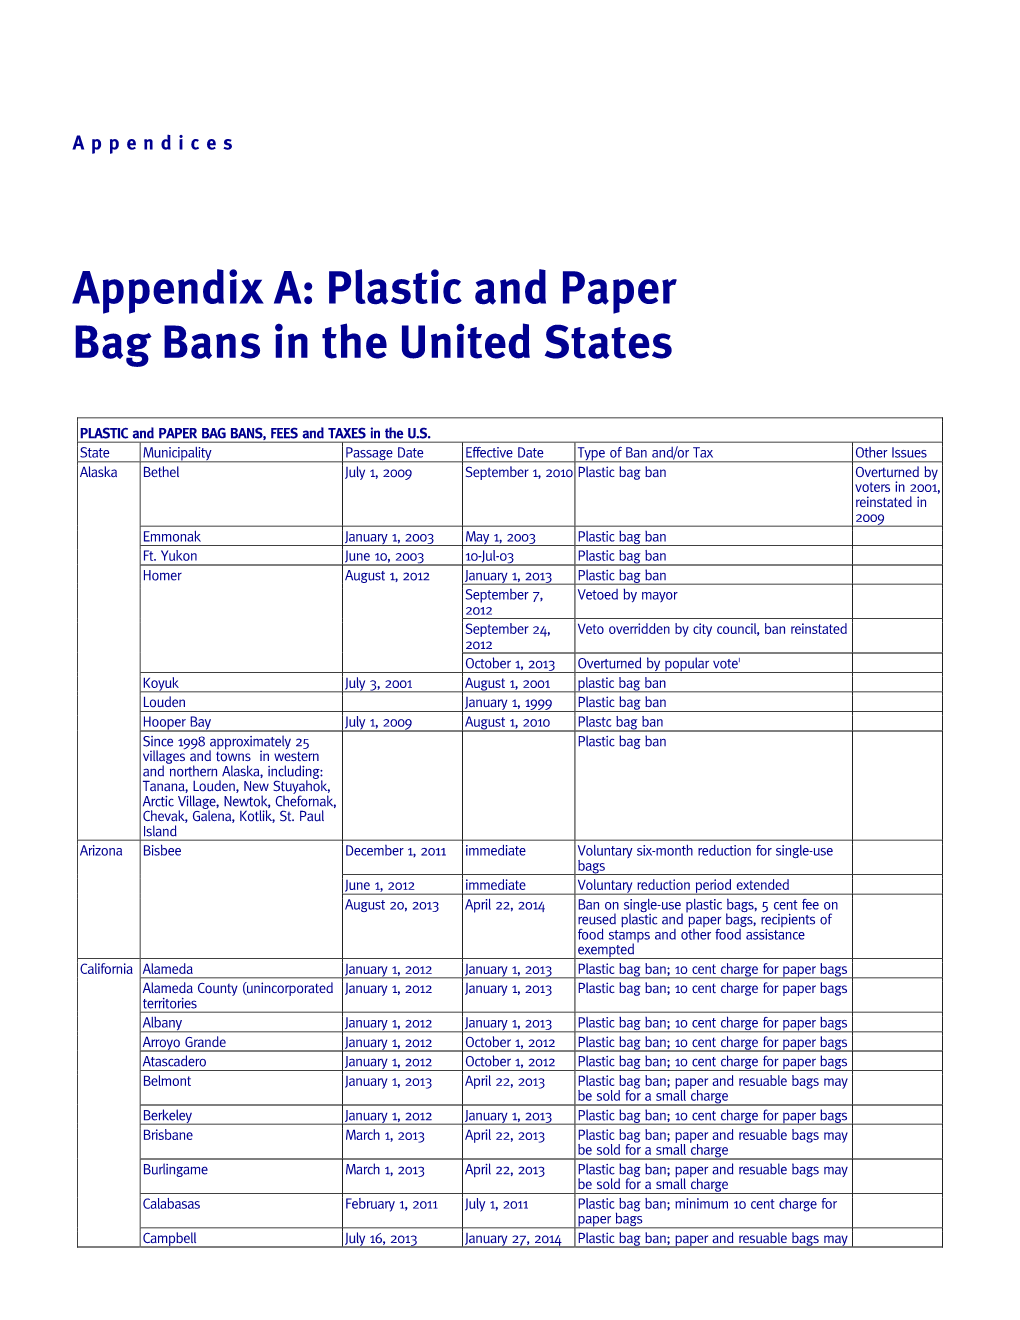 Appendix A: Plastic and Paper Bag Bans in the United States